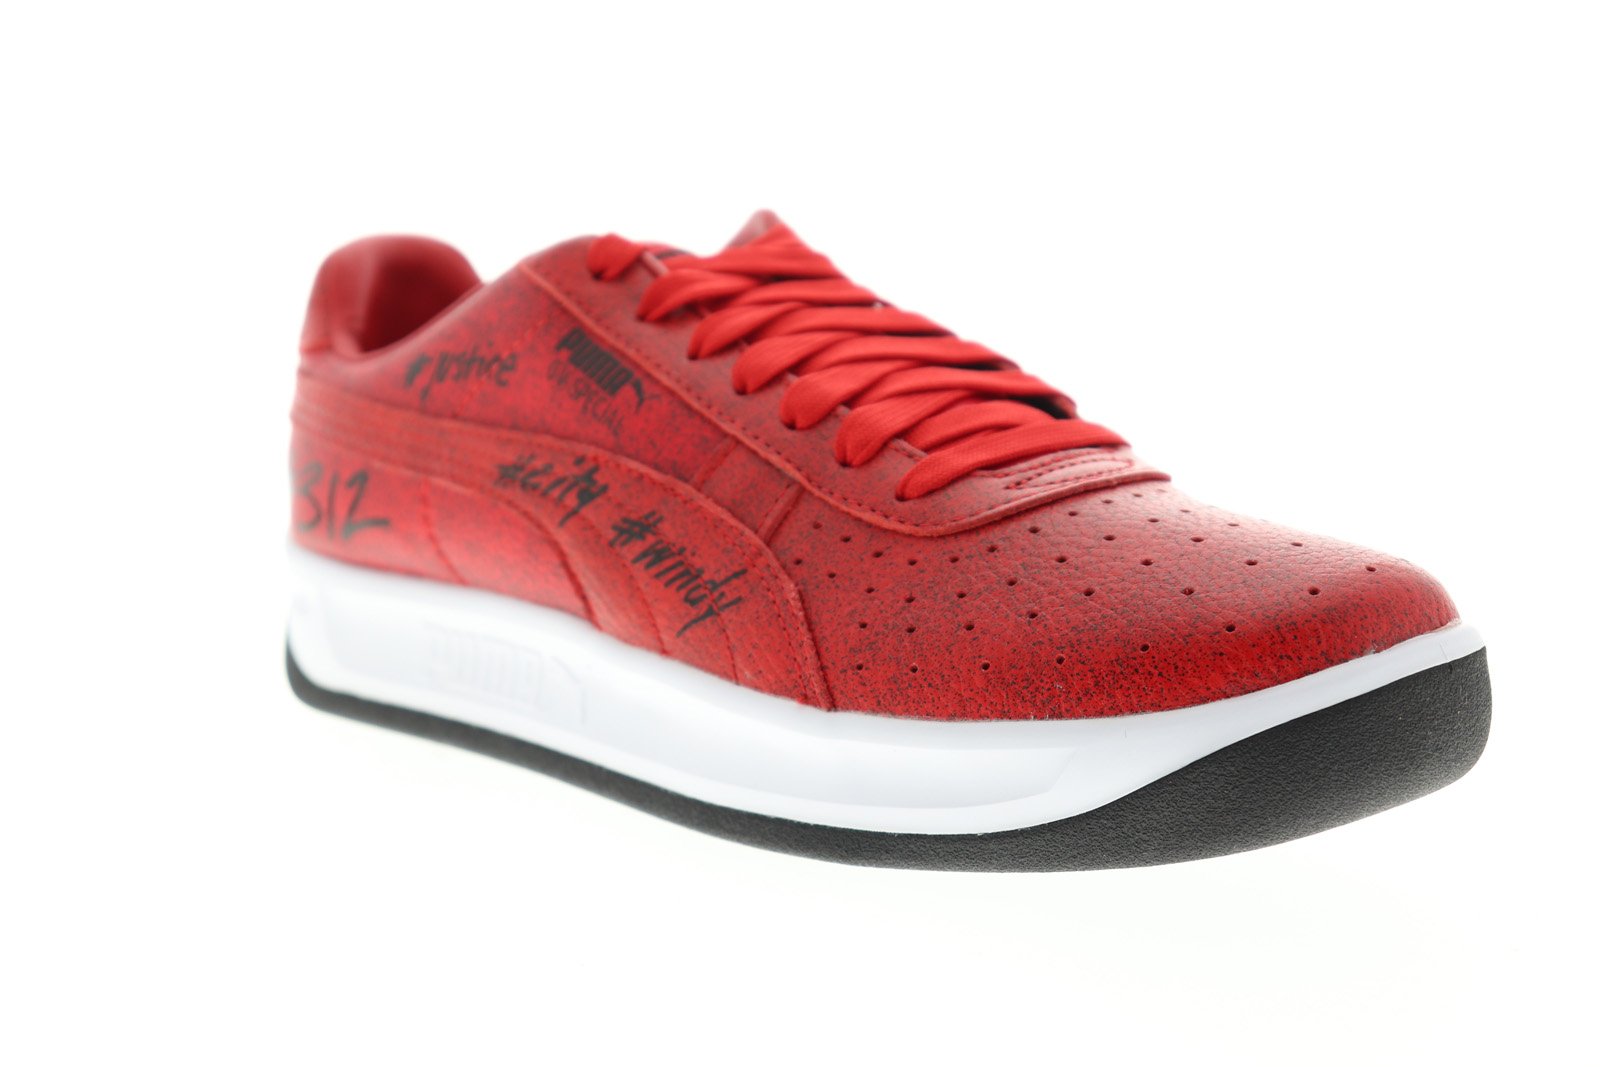 Costa sequía Mecánica Puma GV Special Chicago 36836601 Mens Red Low Top Lifestyle Sneakers S -  Ruze Shoes